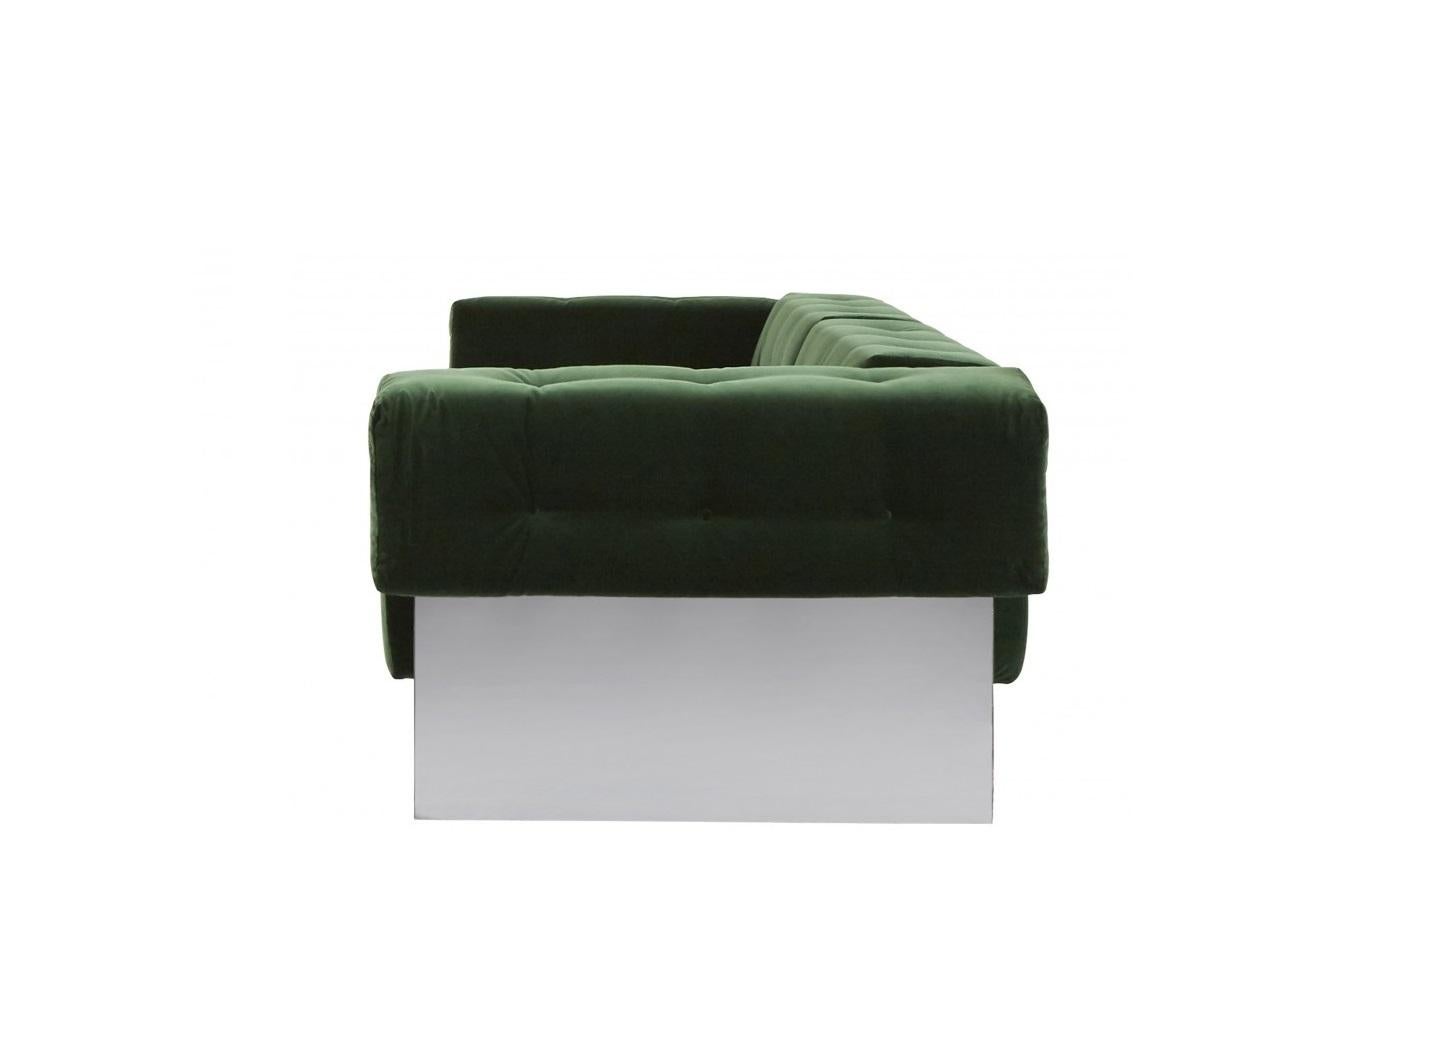 Late 20th Century Milo Baughman Button-Tufted Green & Chrome Wrapped Sofa For Sale